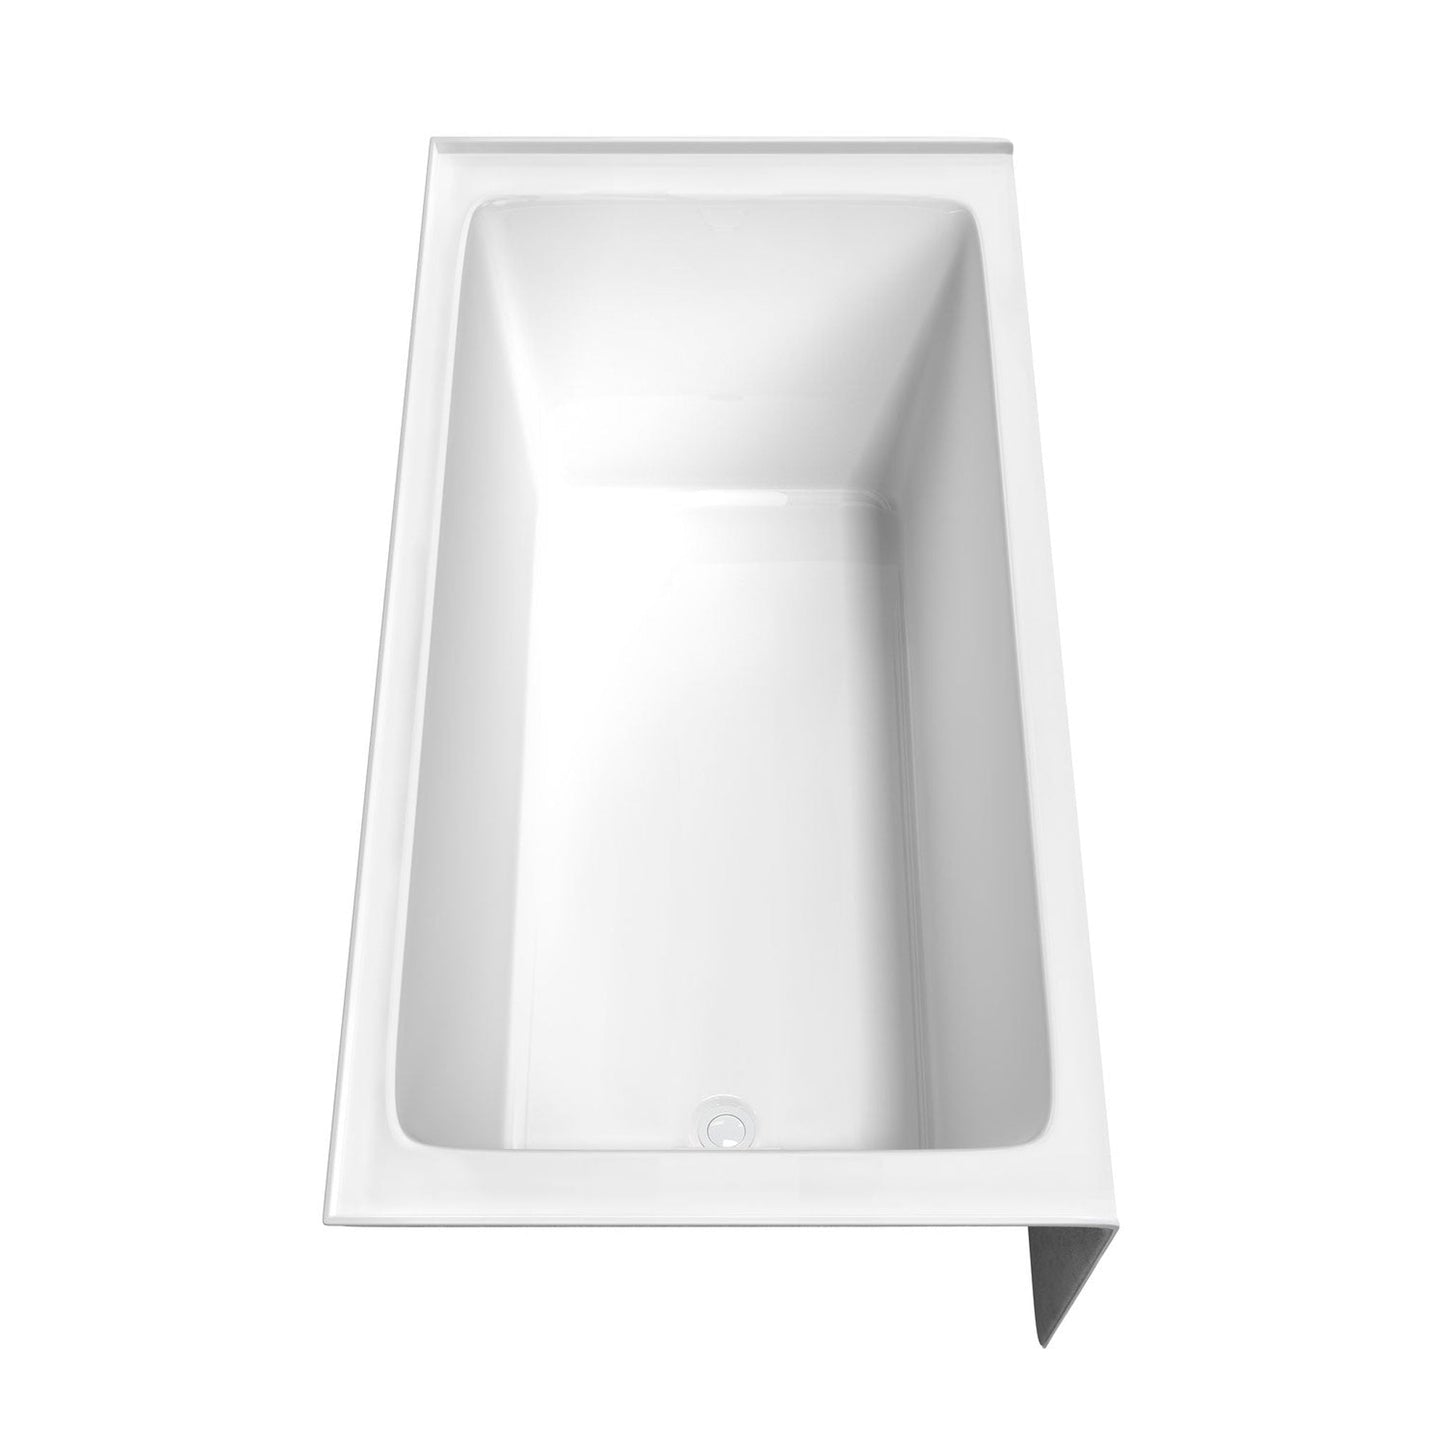 Wyndham Collection Grayley 60" x 32" Alcove Bathtub in White With Left-Hand Drain and Overflow Trim in Shiny White